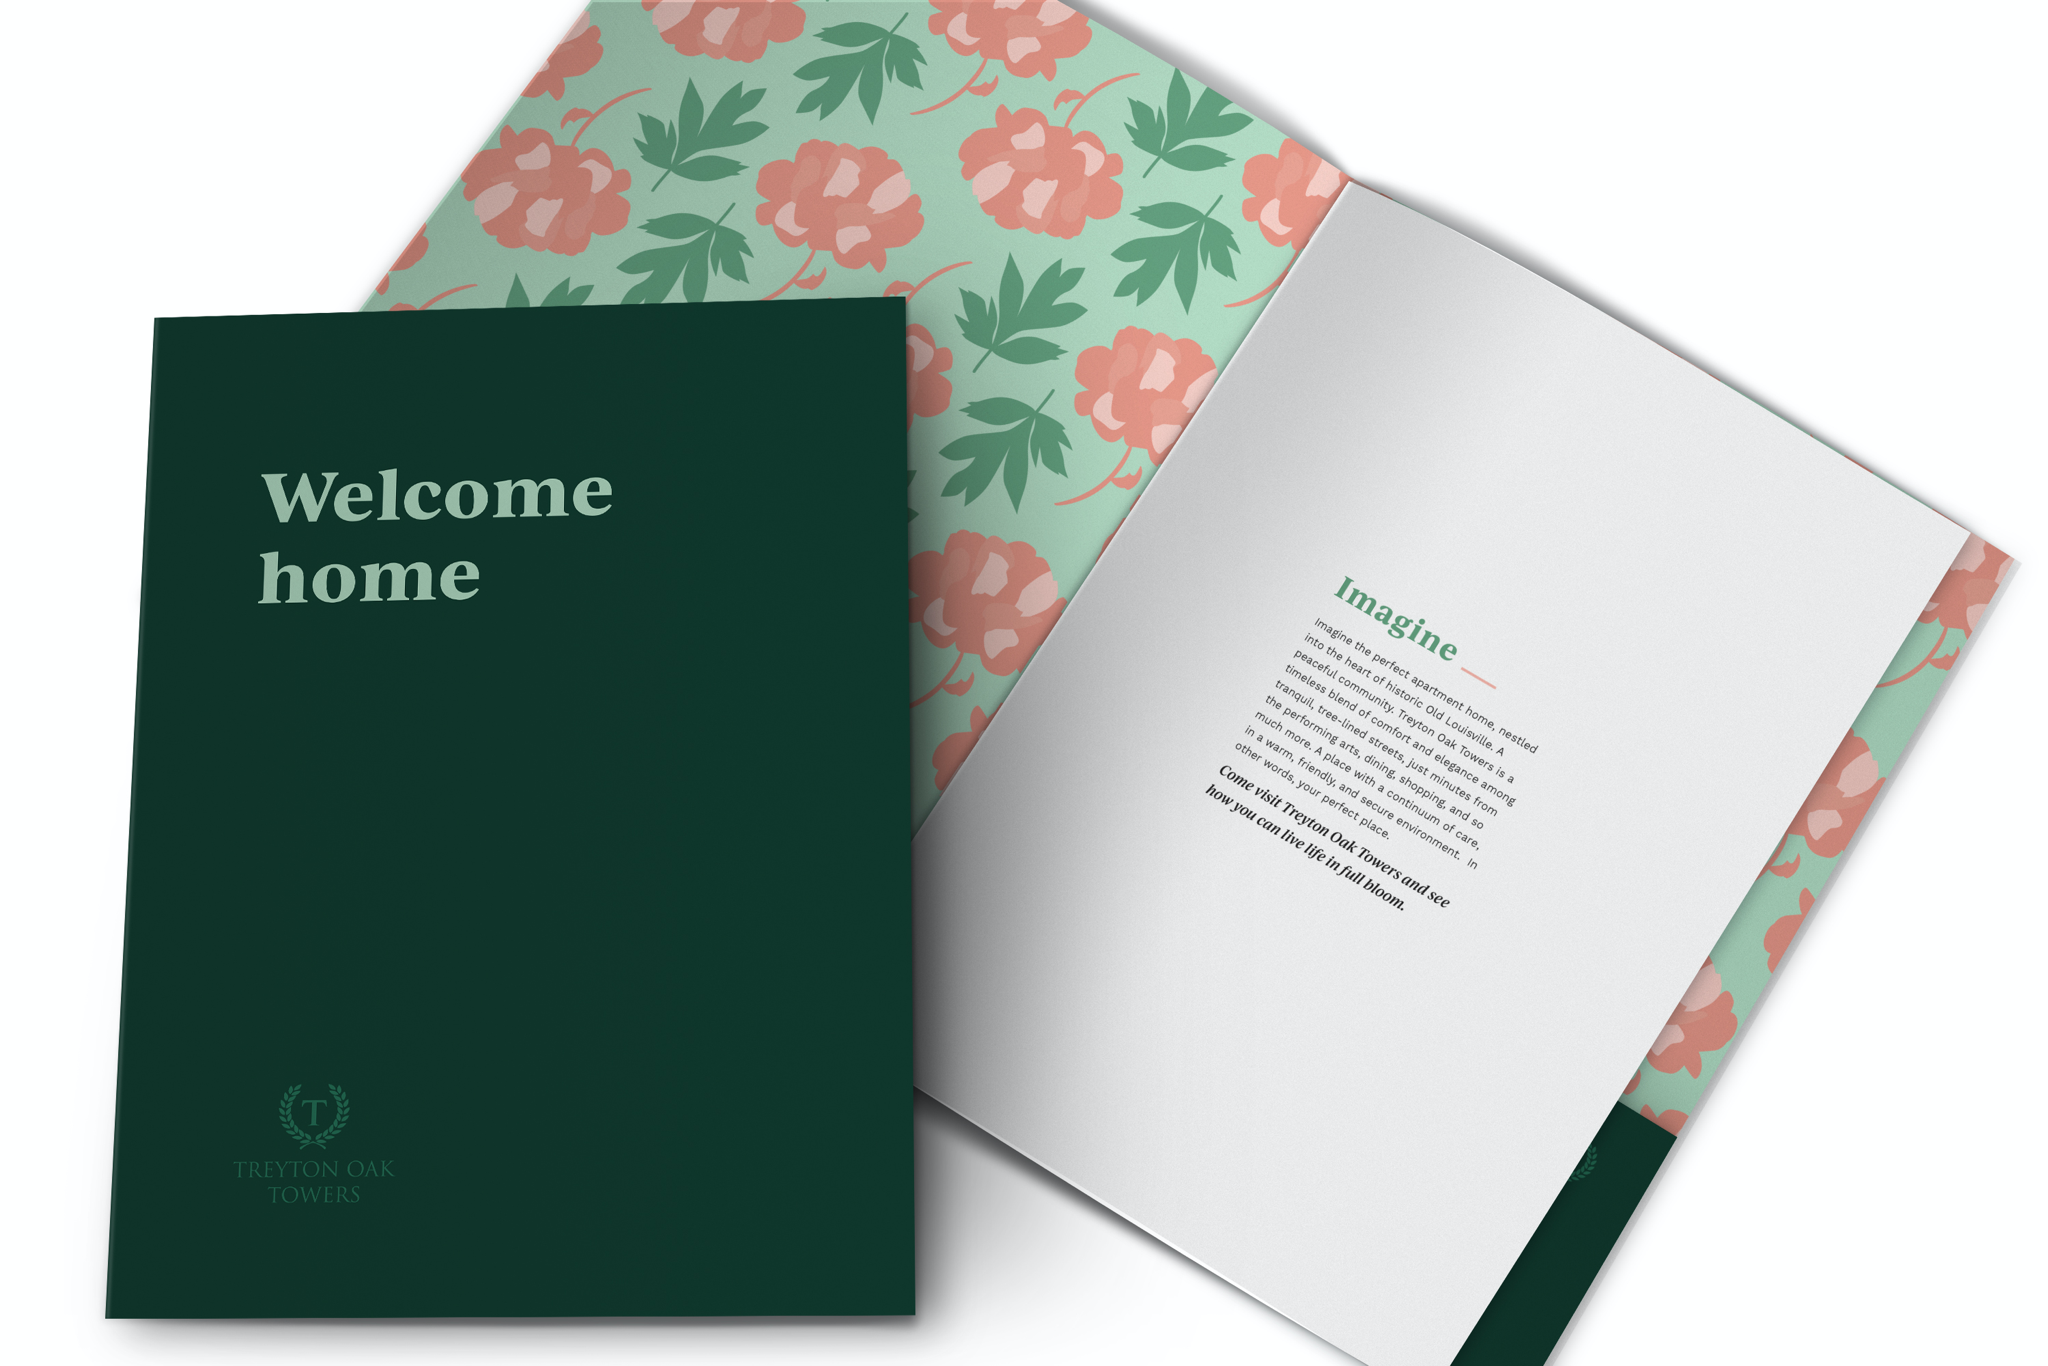 Branded welcome packet for retirement community.